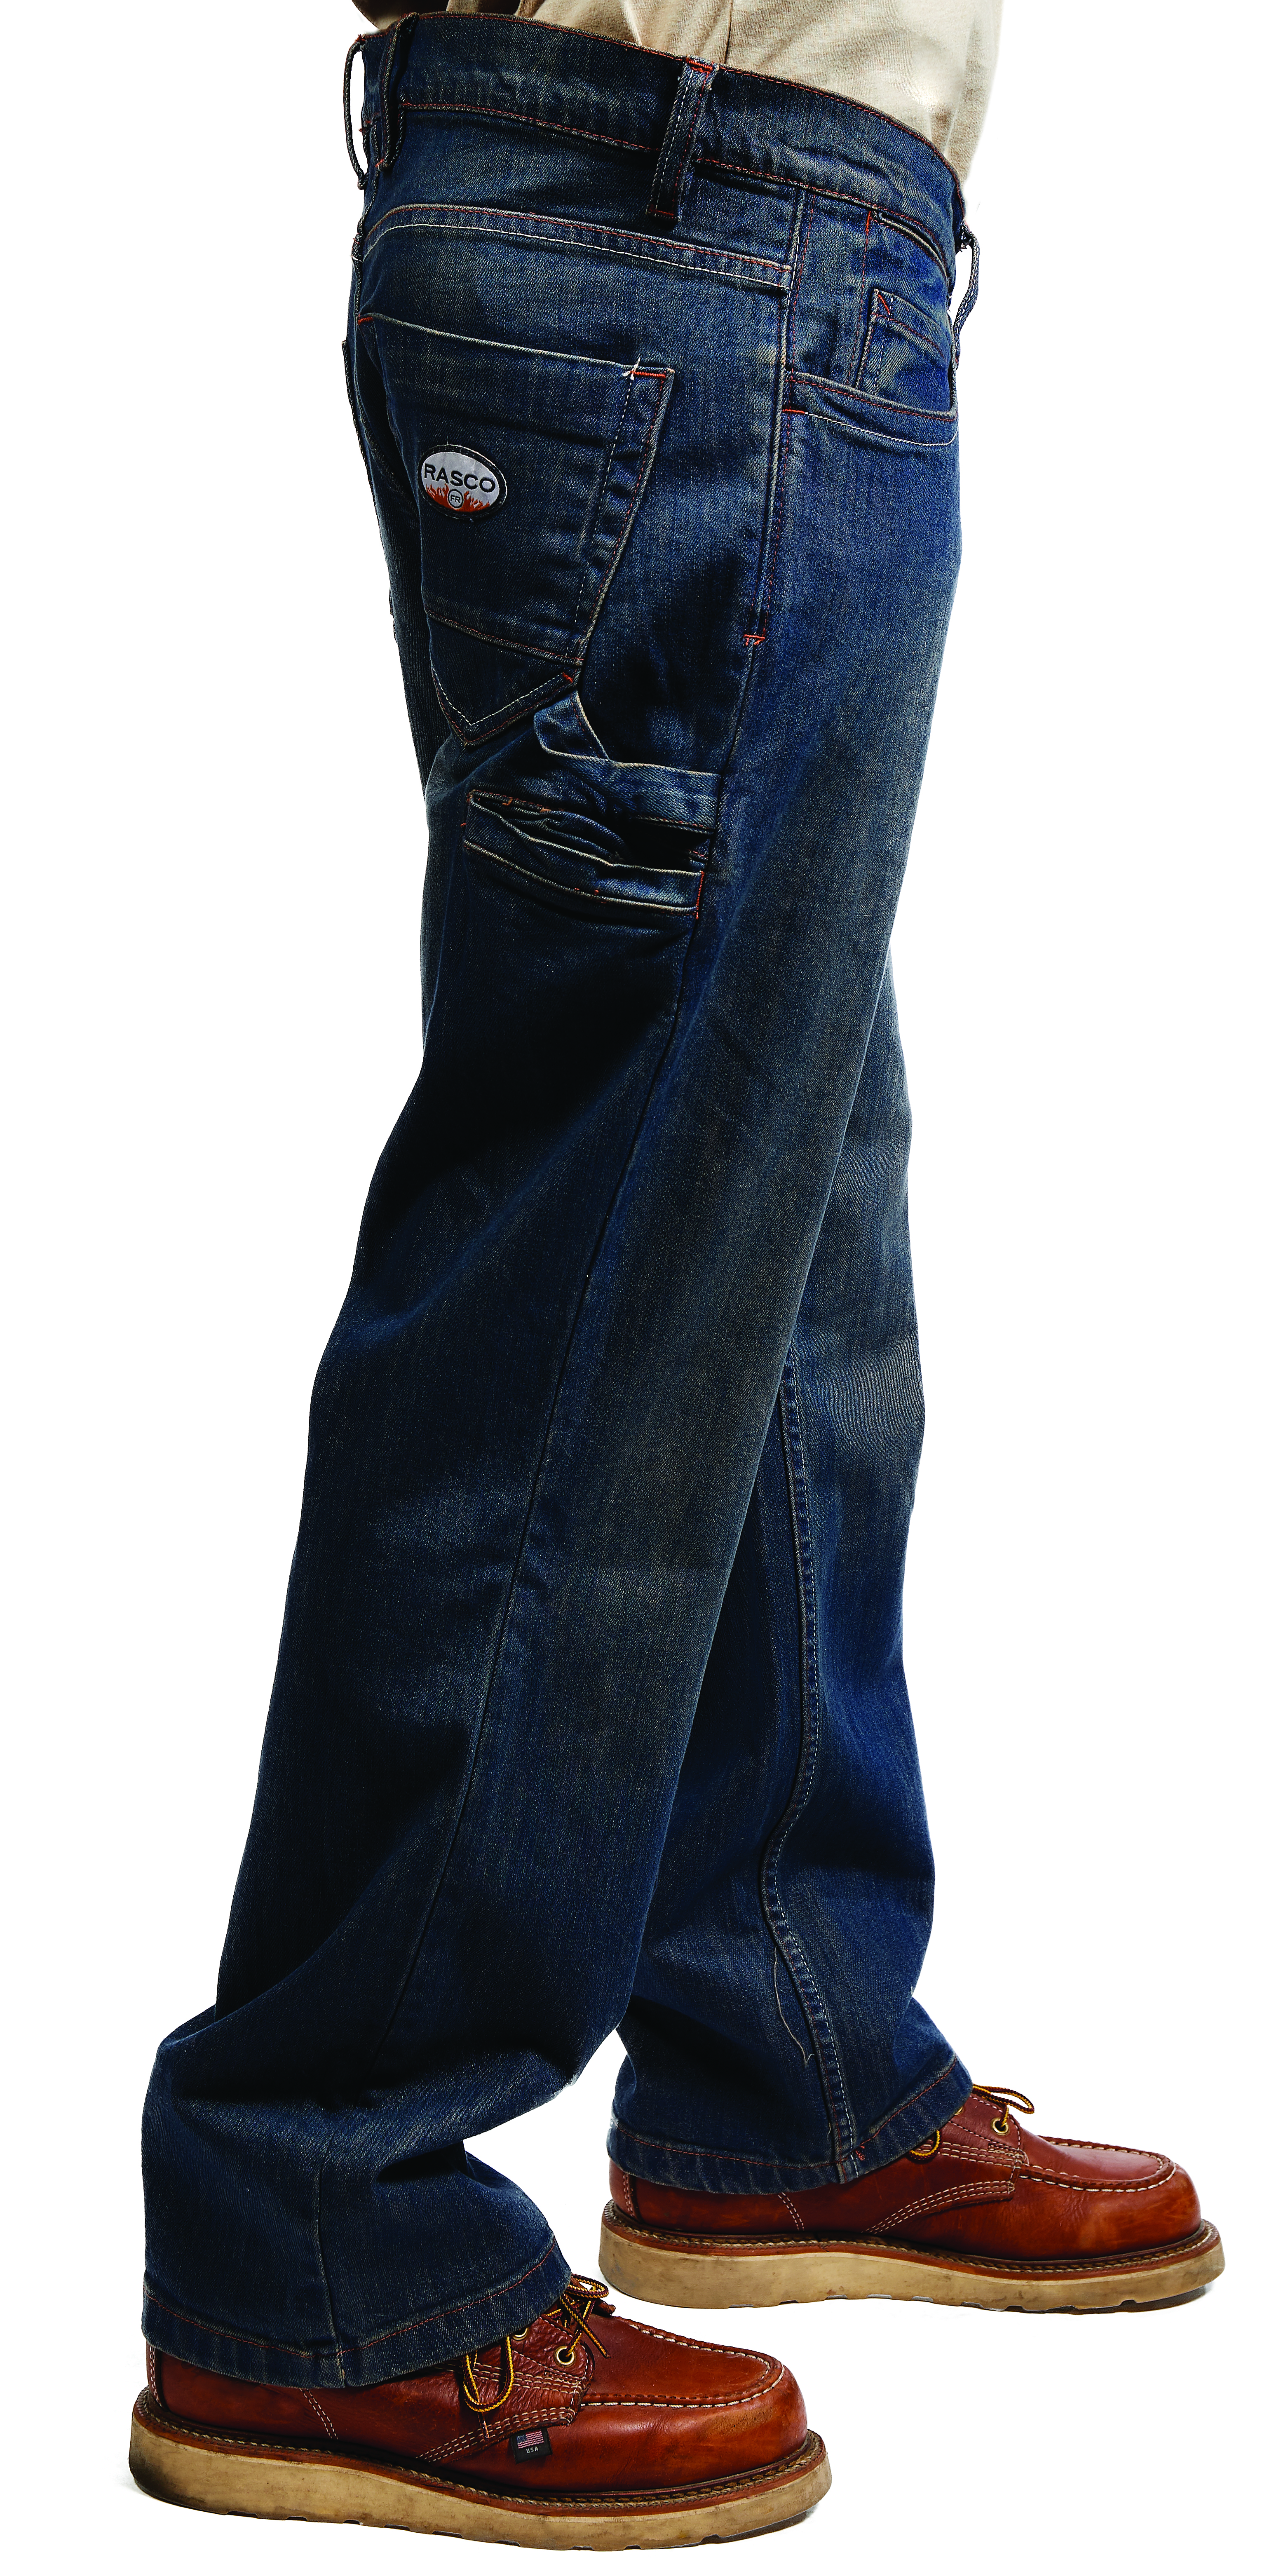 FR Relaxed Fit Stretch Jeans-Rasco FR